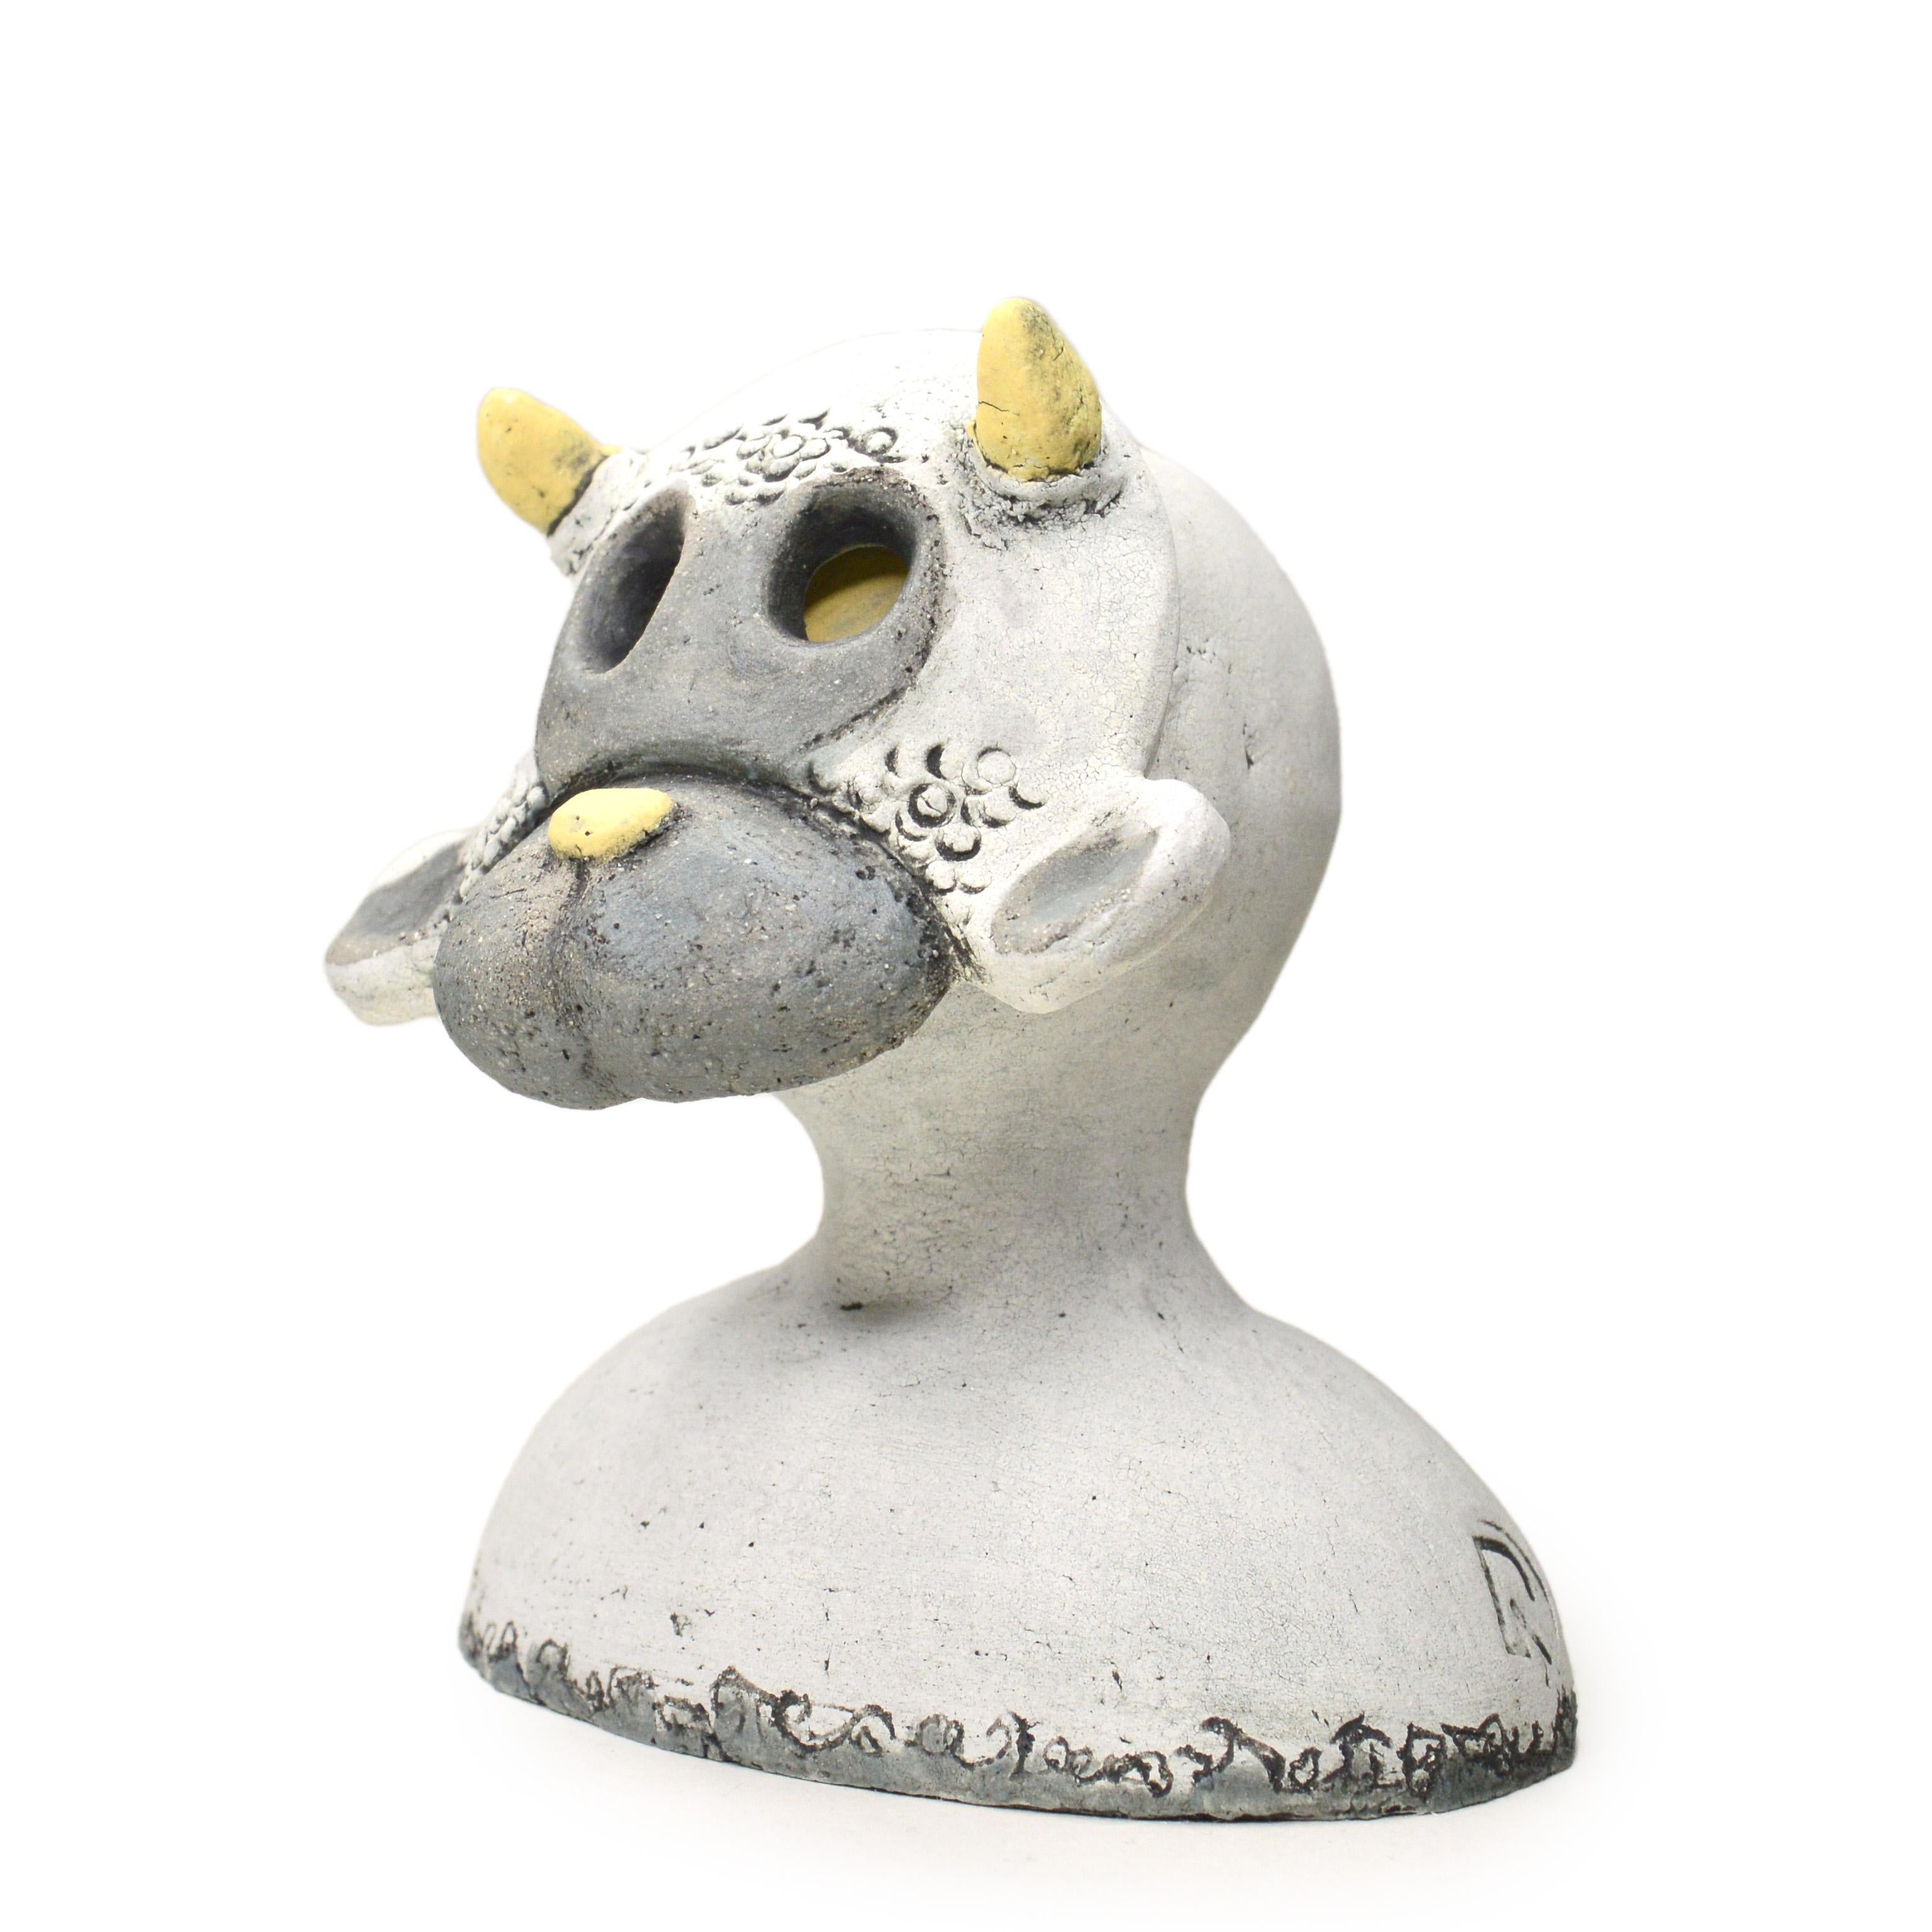 Pineco number 0007 Original Ceramic sculpture with a sheep mask representing simplicity, gentleness, fearlessness and bravery.

Meet a variety of characters with distinct masks and postures. These sculptures are fascinating and make you curious,